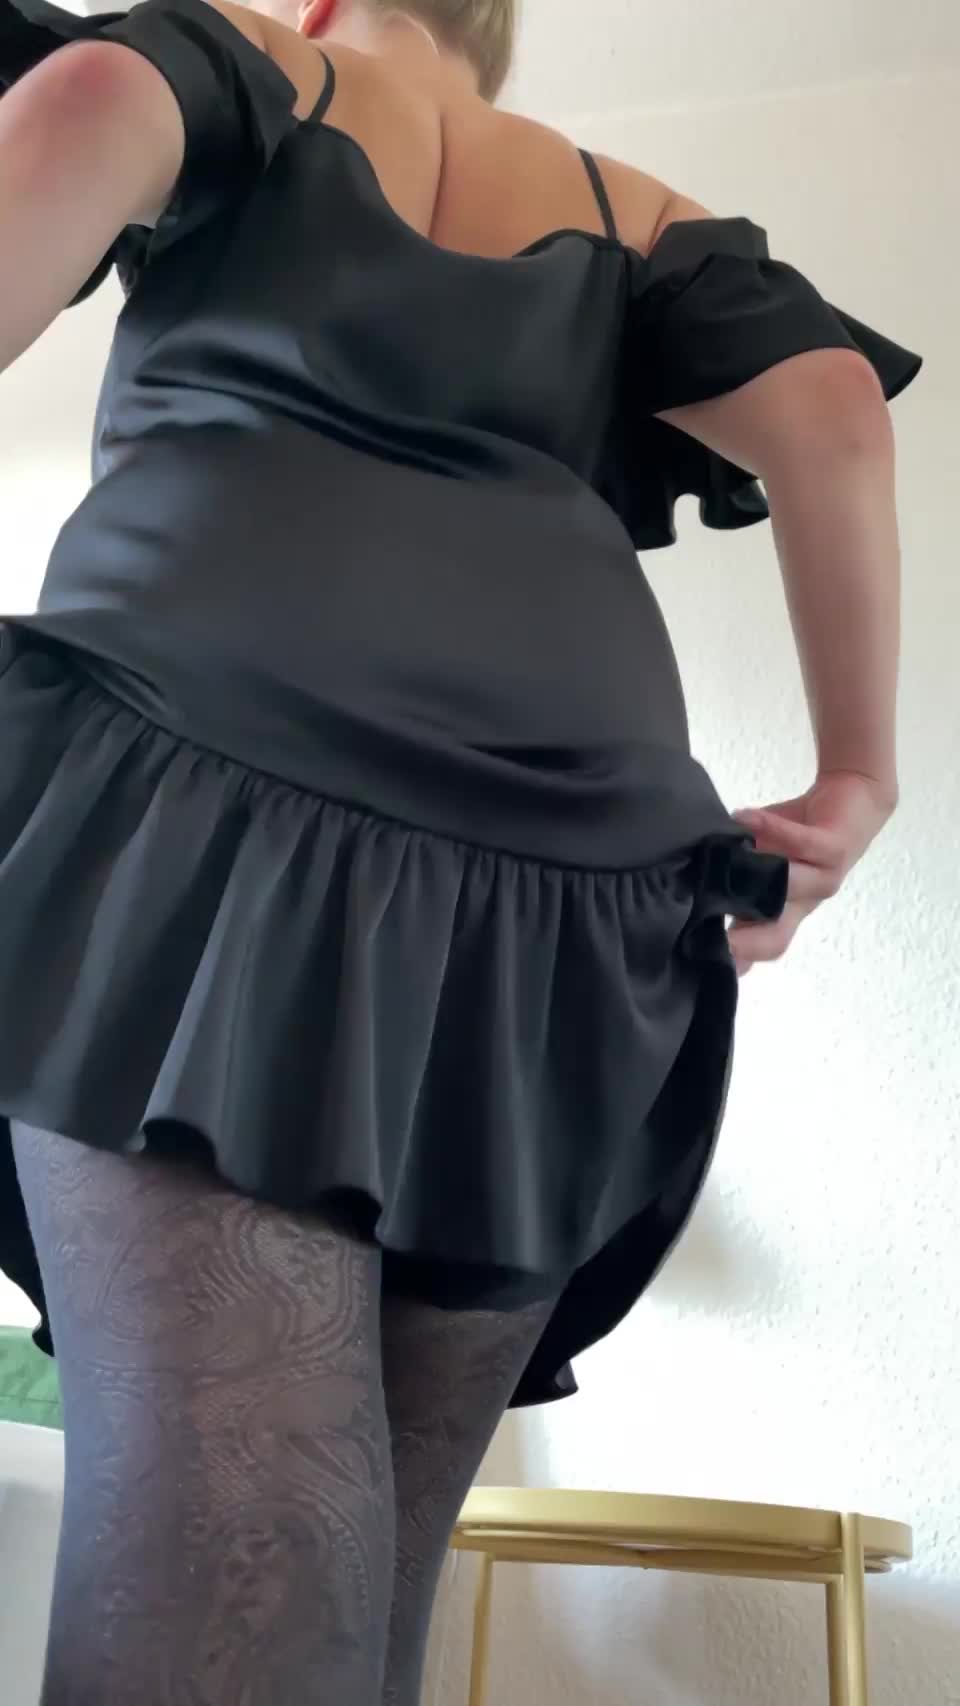 Do you like what I am wearing for a date with you? : video clip